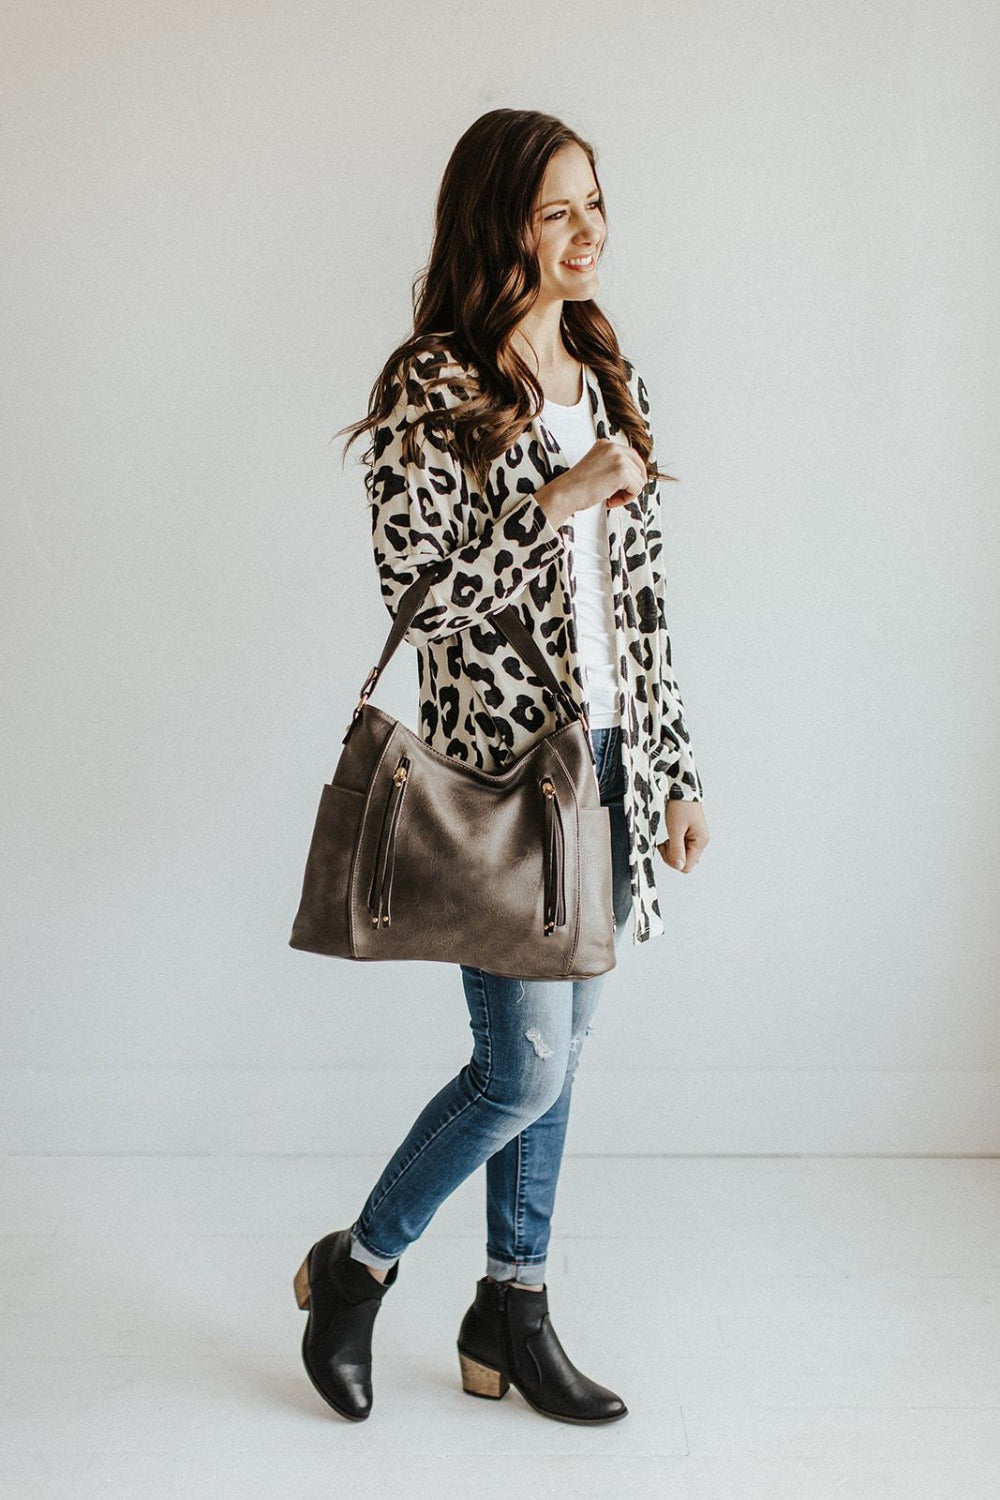 Modern and Chic Boutique Emerson Slouchy Bag